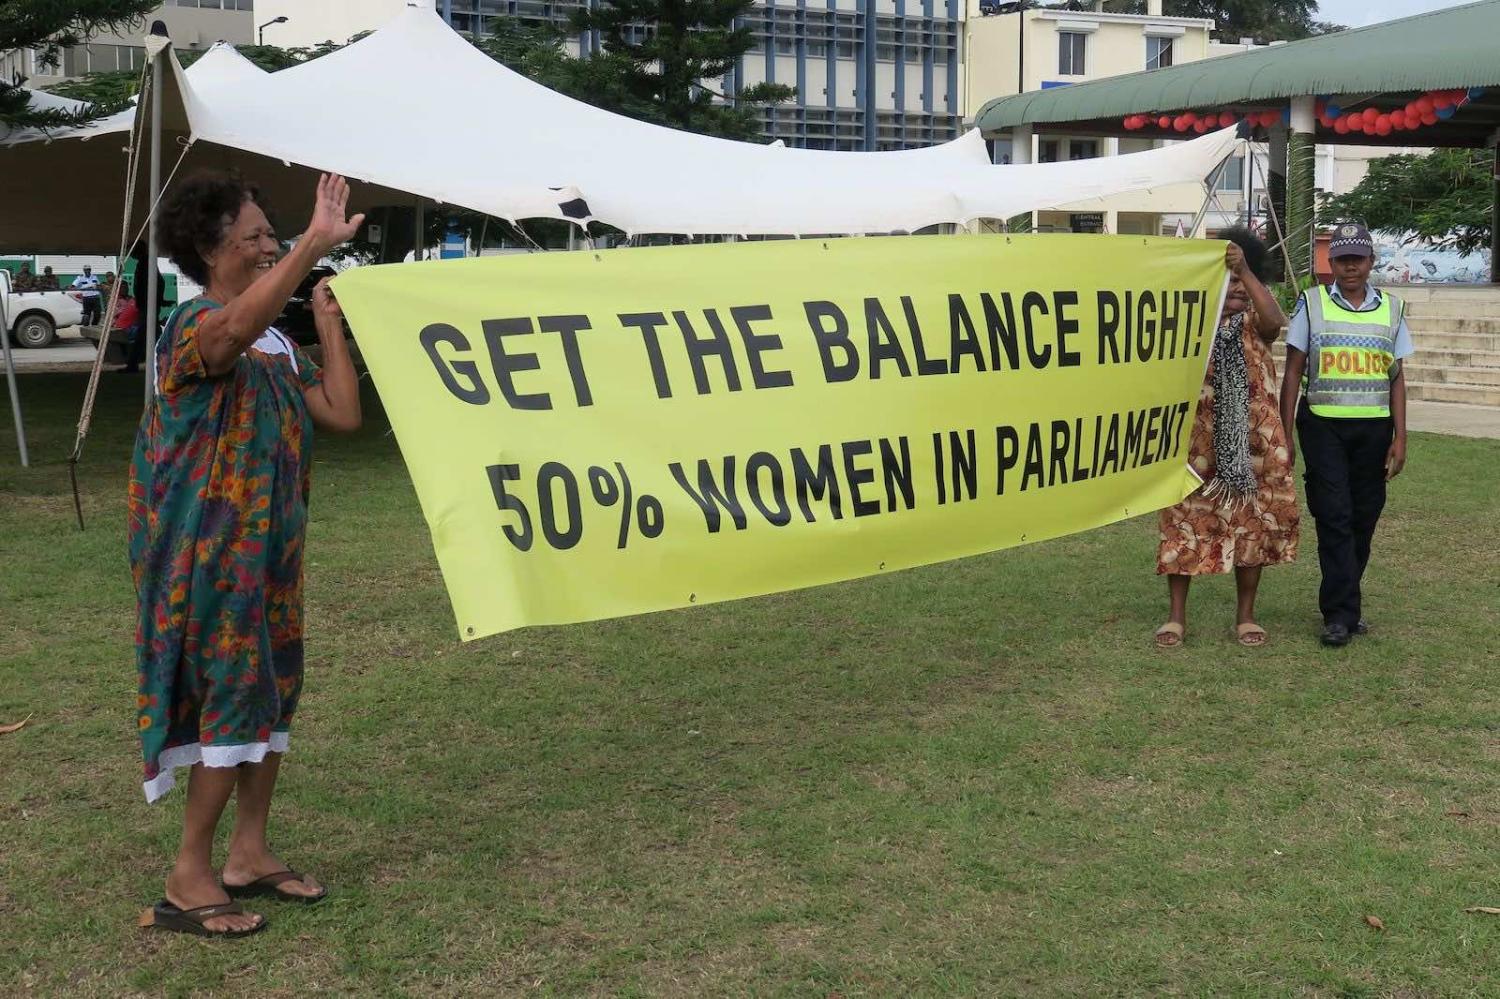 Highlighting a demand for equal representation in Vanuatu’s parliament during a visit by United Nations Secretary-General Antonio Guterres in 2019 (Ben Bohane/AFP via Getty Images)